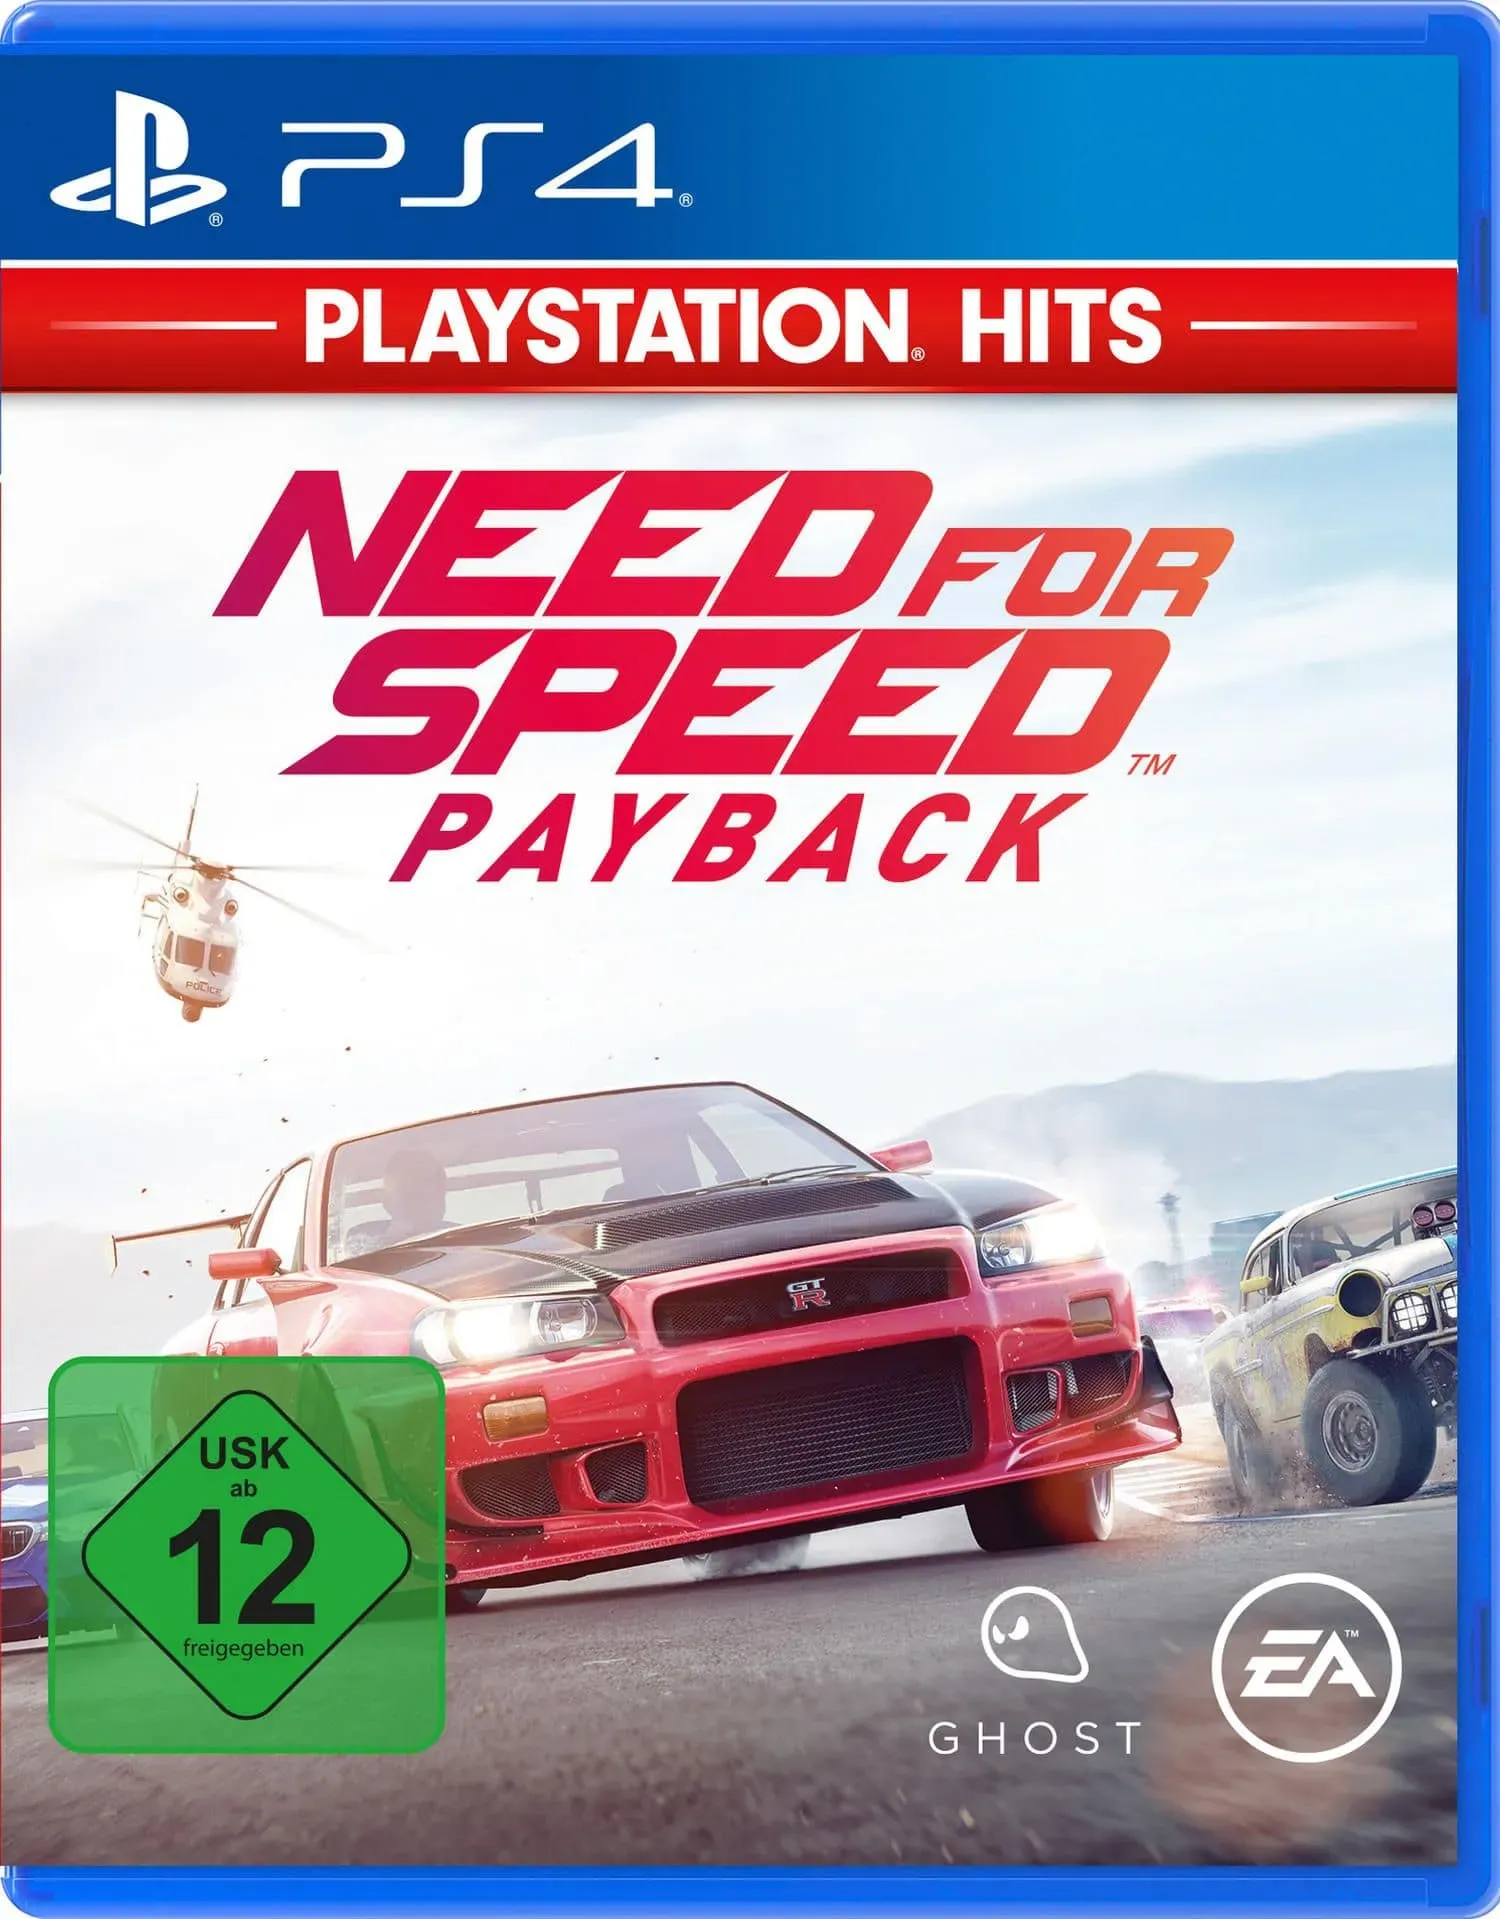 PlayStation Hits: Need for Speed Payback (PlayStation 4)